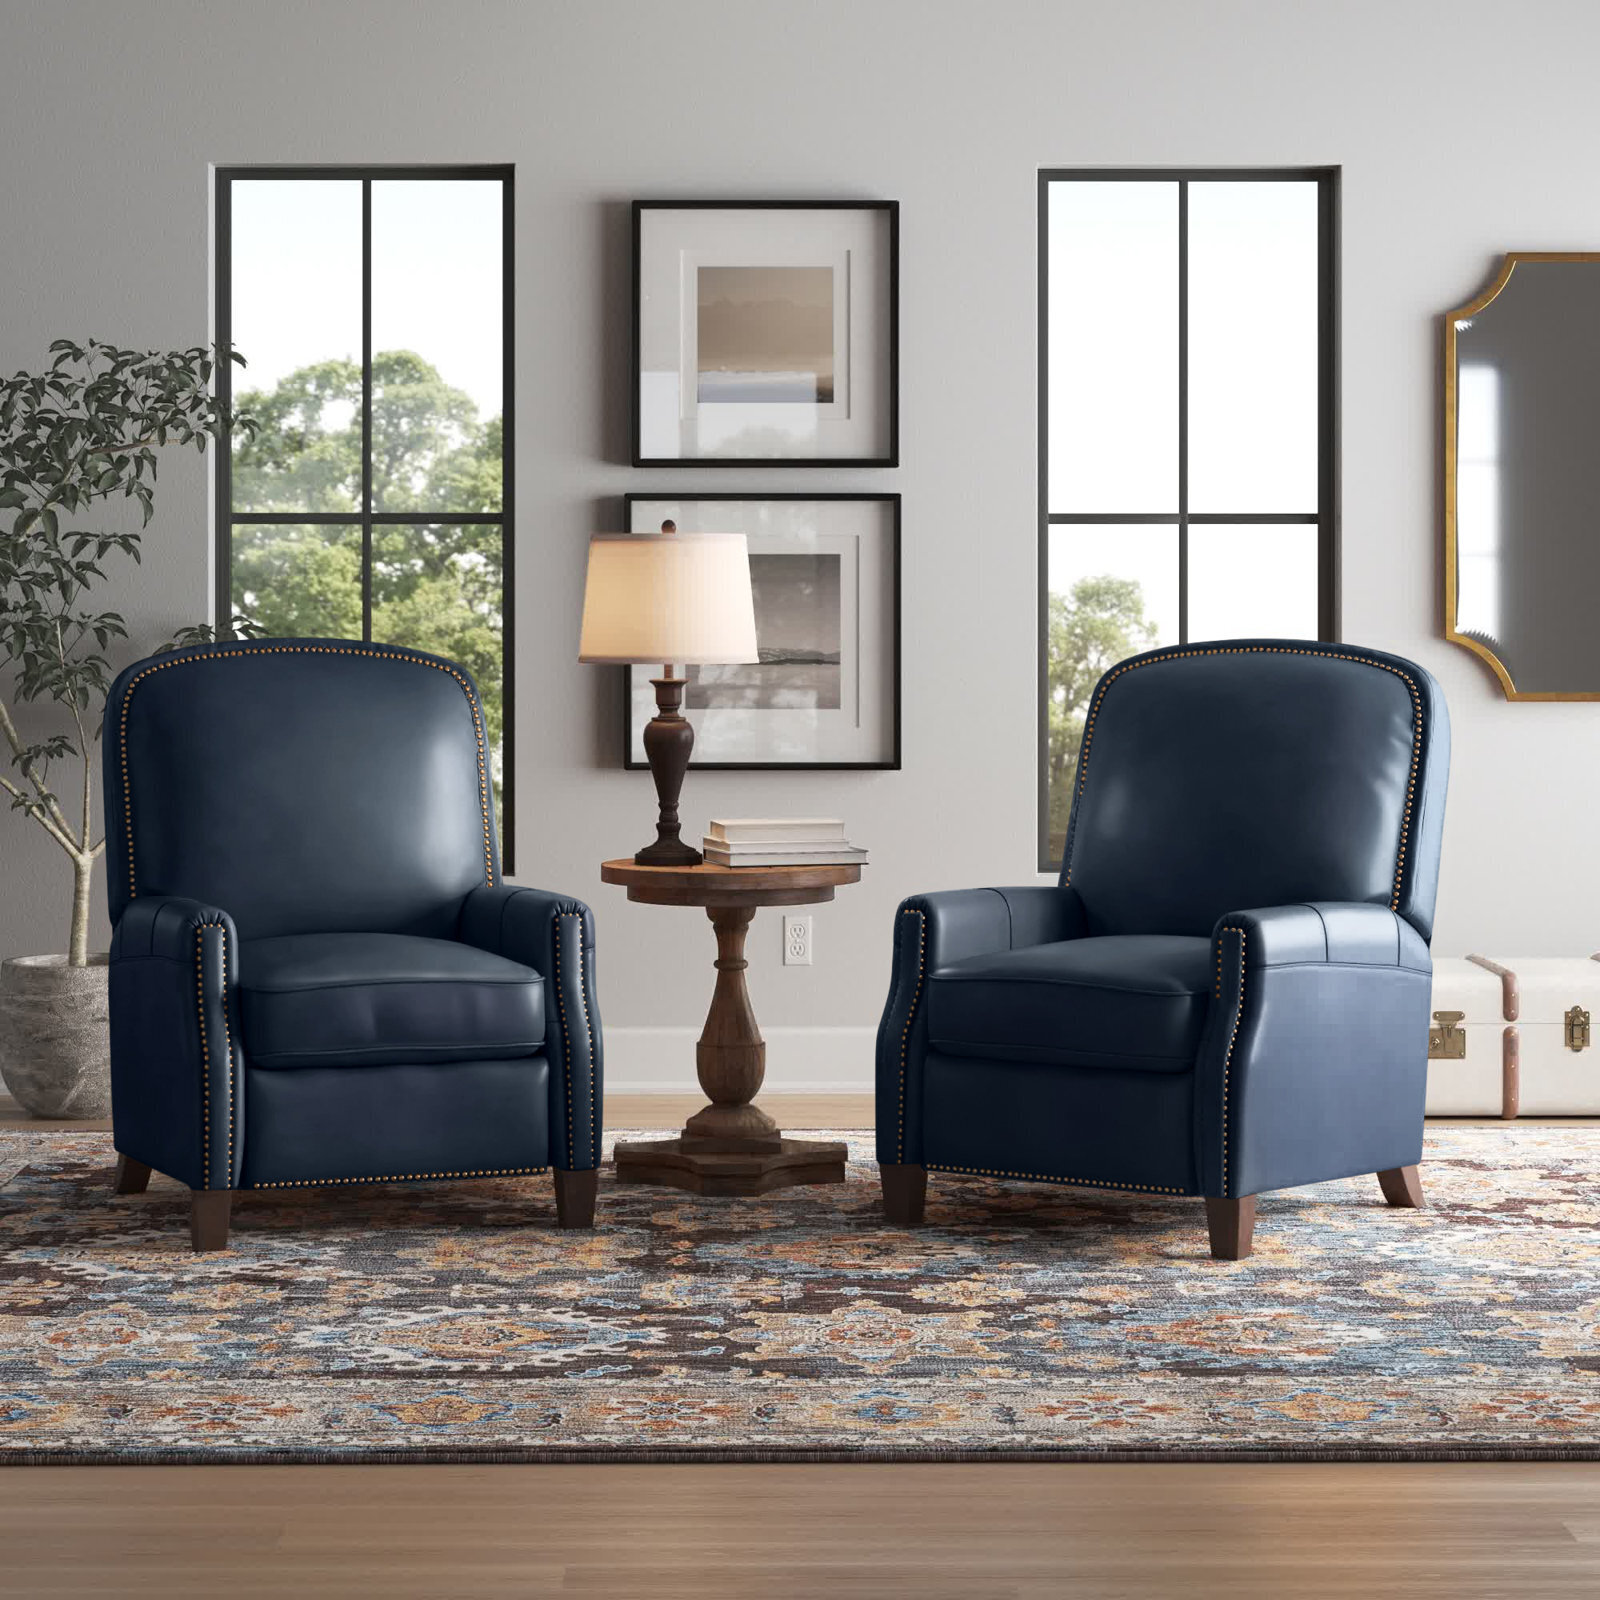 Set of two dark blue leather recliners